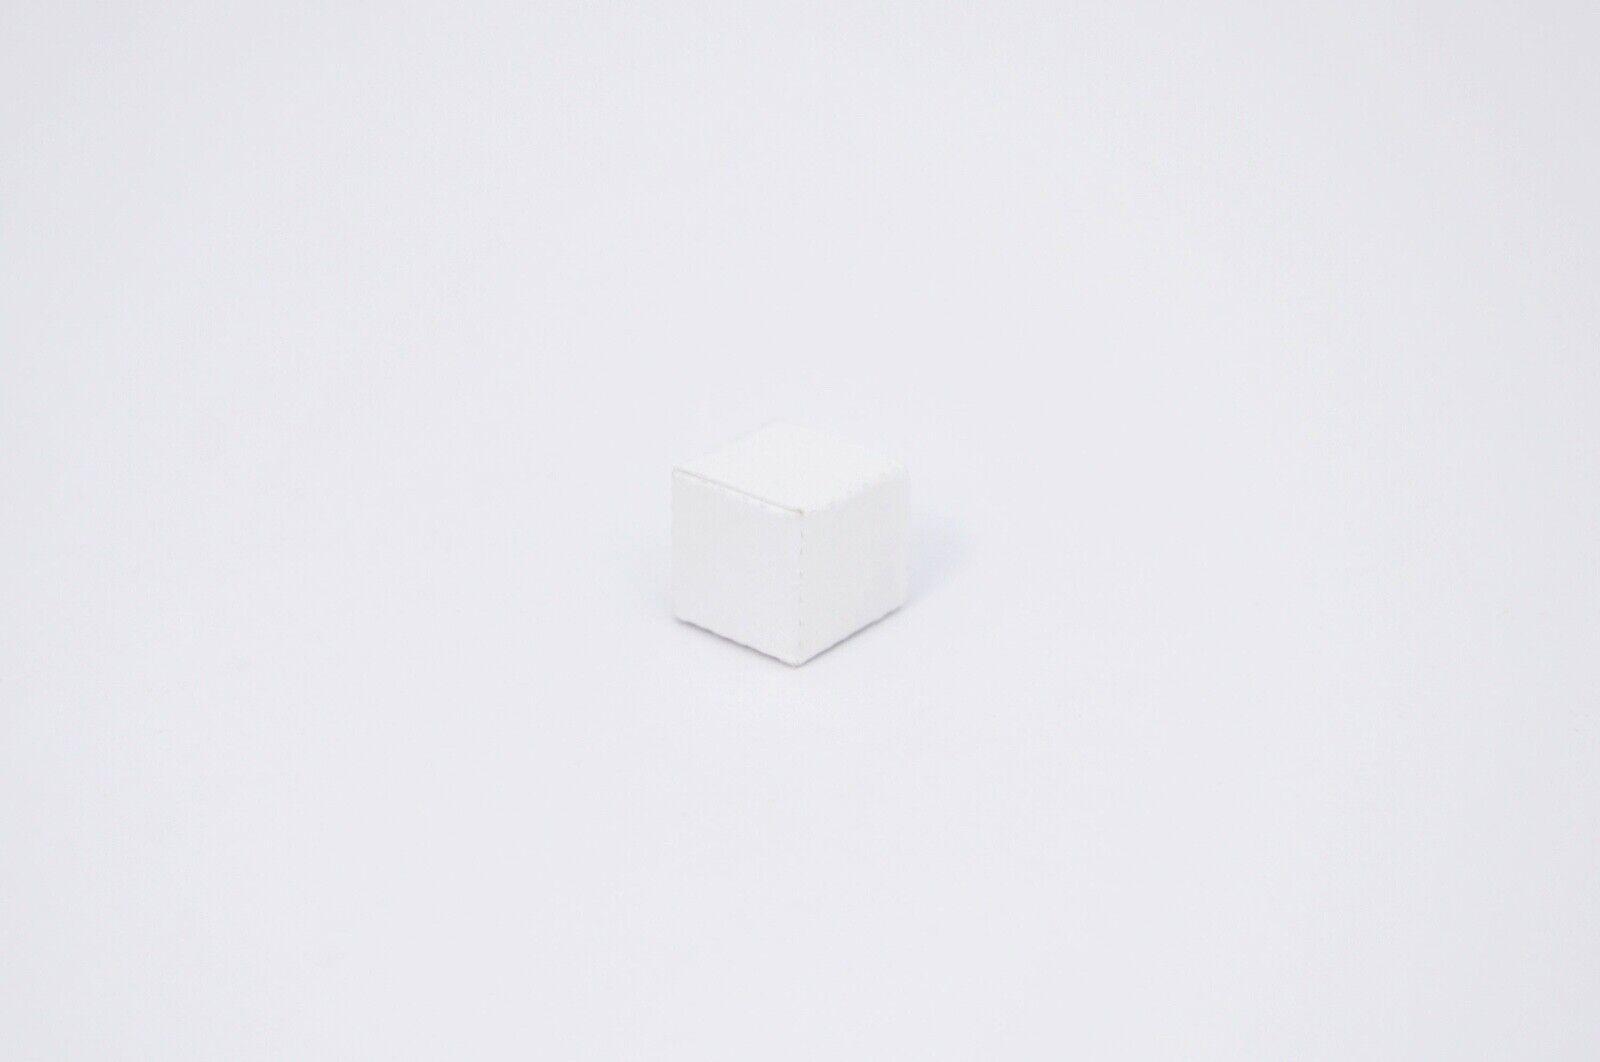 25 x Small White cardboard Box for Small Product or Gift Box 1x1x1 cm